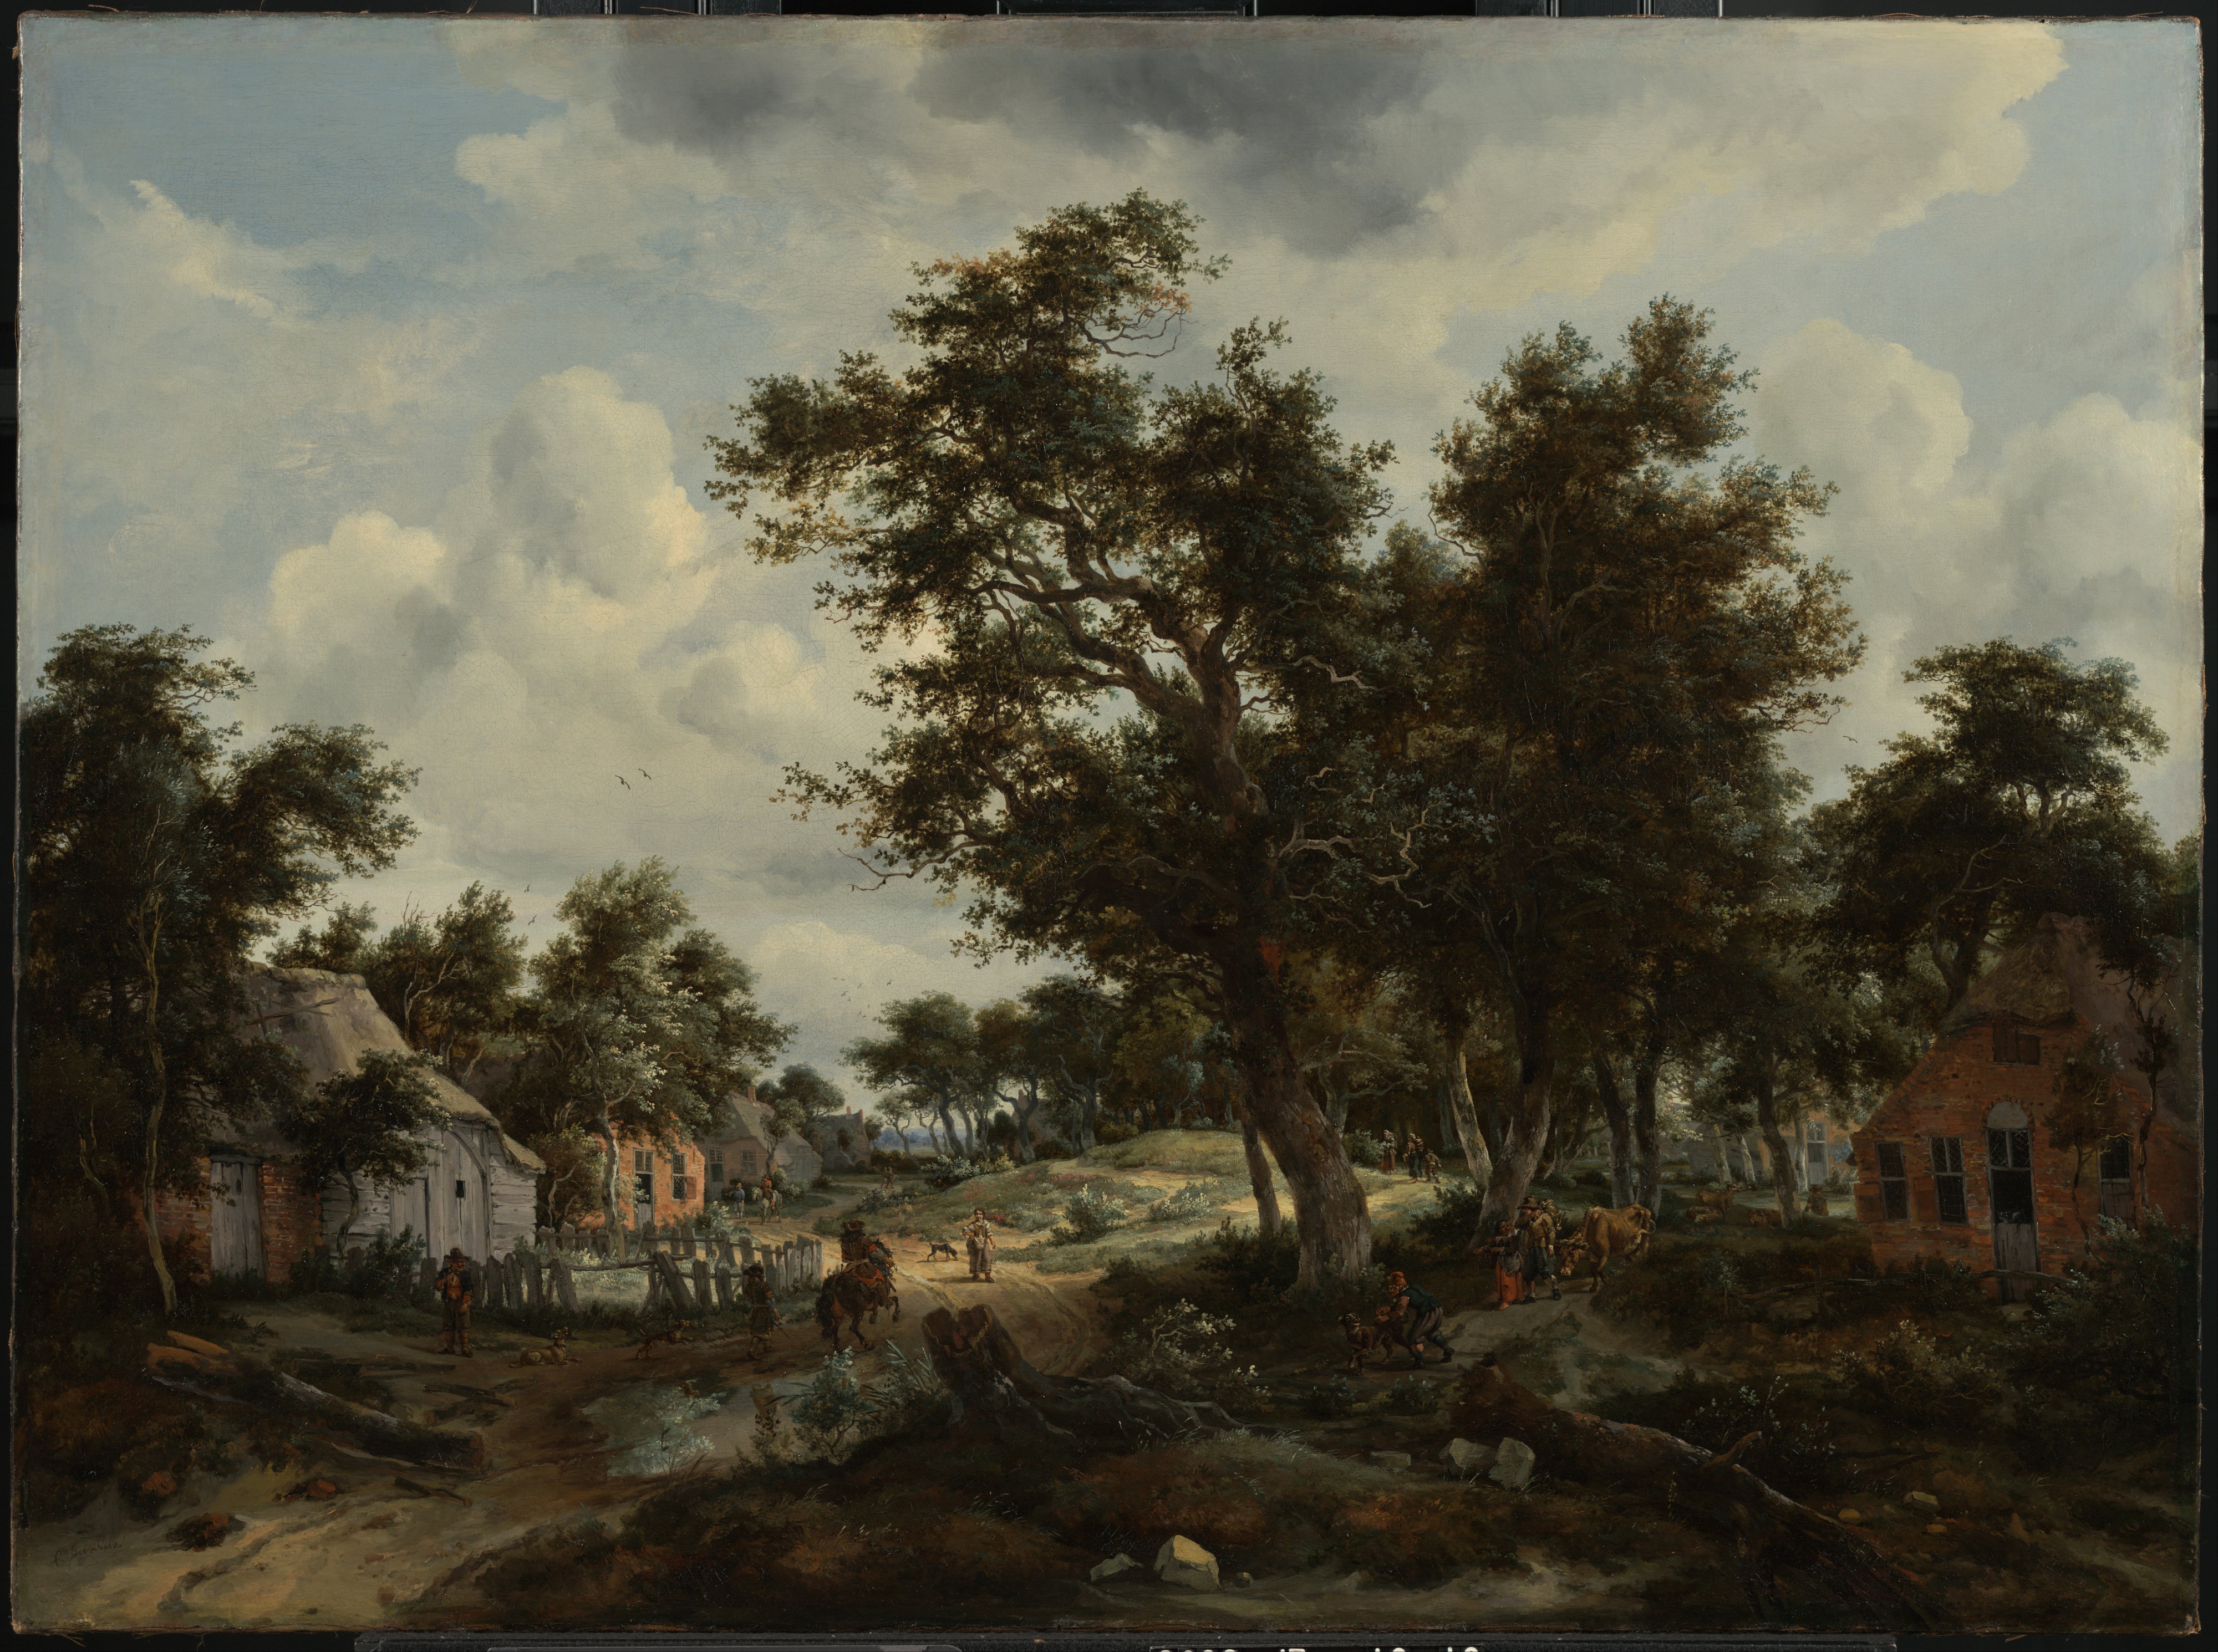 Meindert Hobbema (Dutch - A Wooded Landscape with Travelers on a Path through a Hamlet - Google Art Project